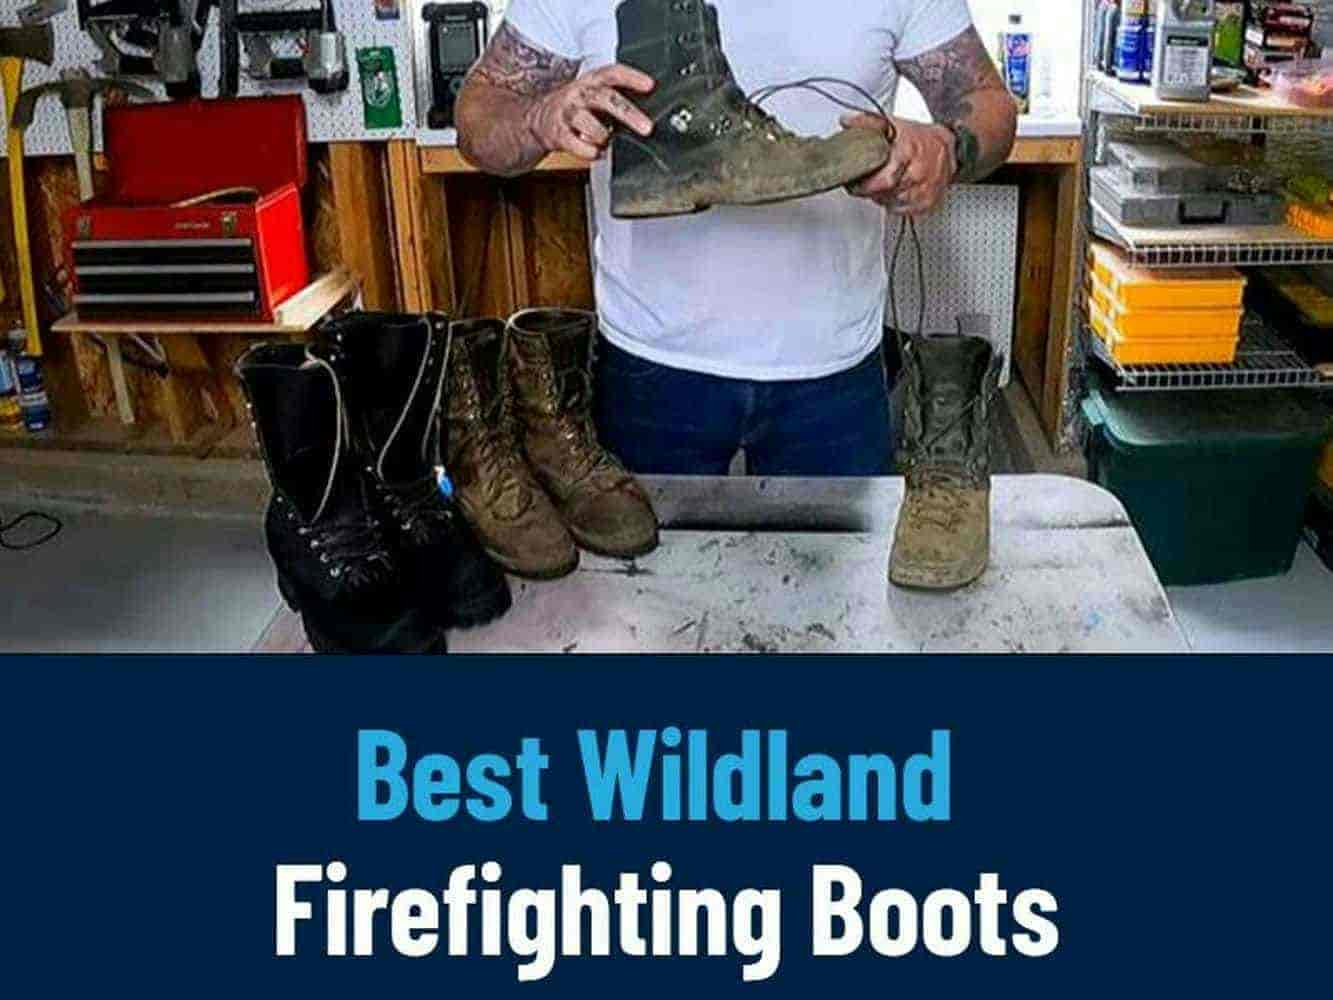 Best wildland firefigthing boots